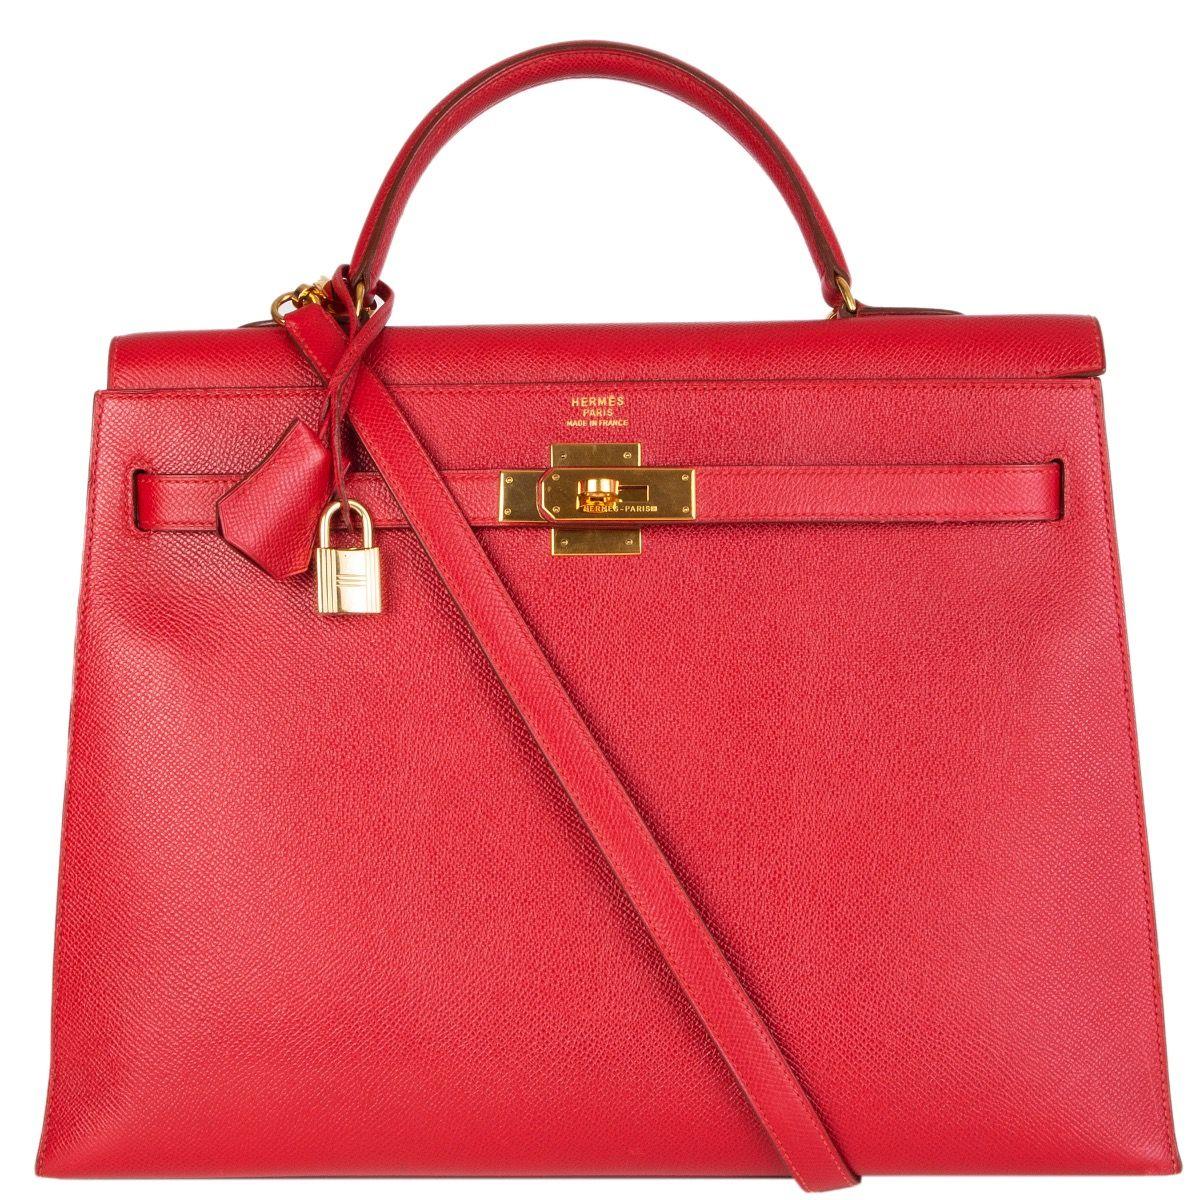 Women's HERMES Rouge Vif red leather KELLY 35 SELLIER Bag